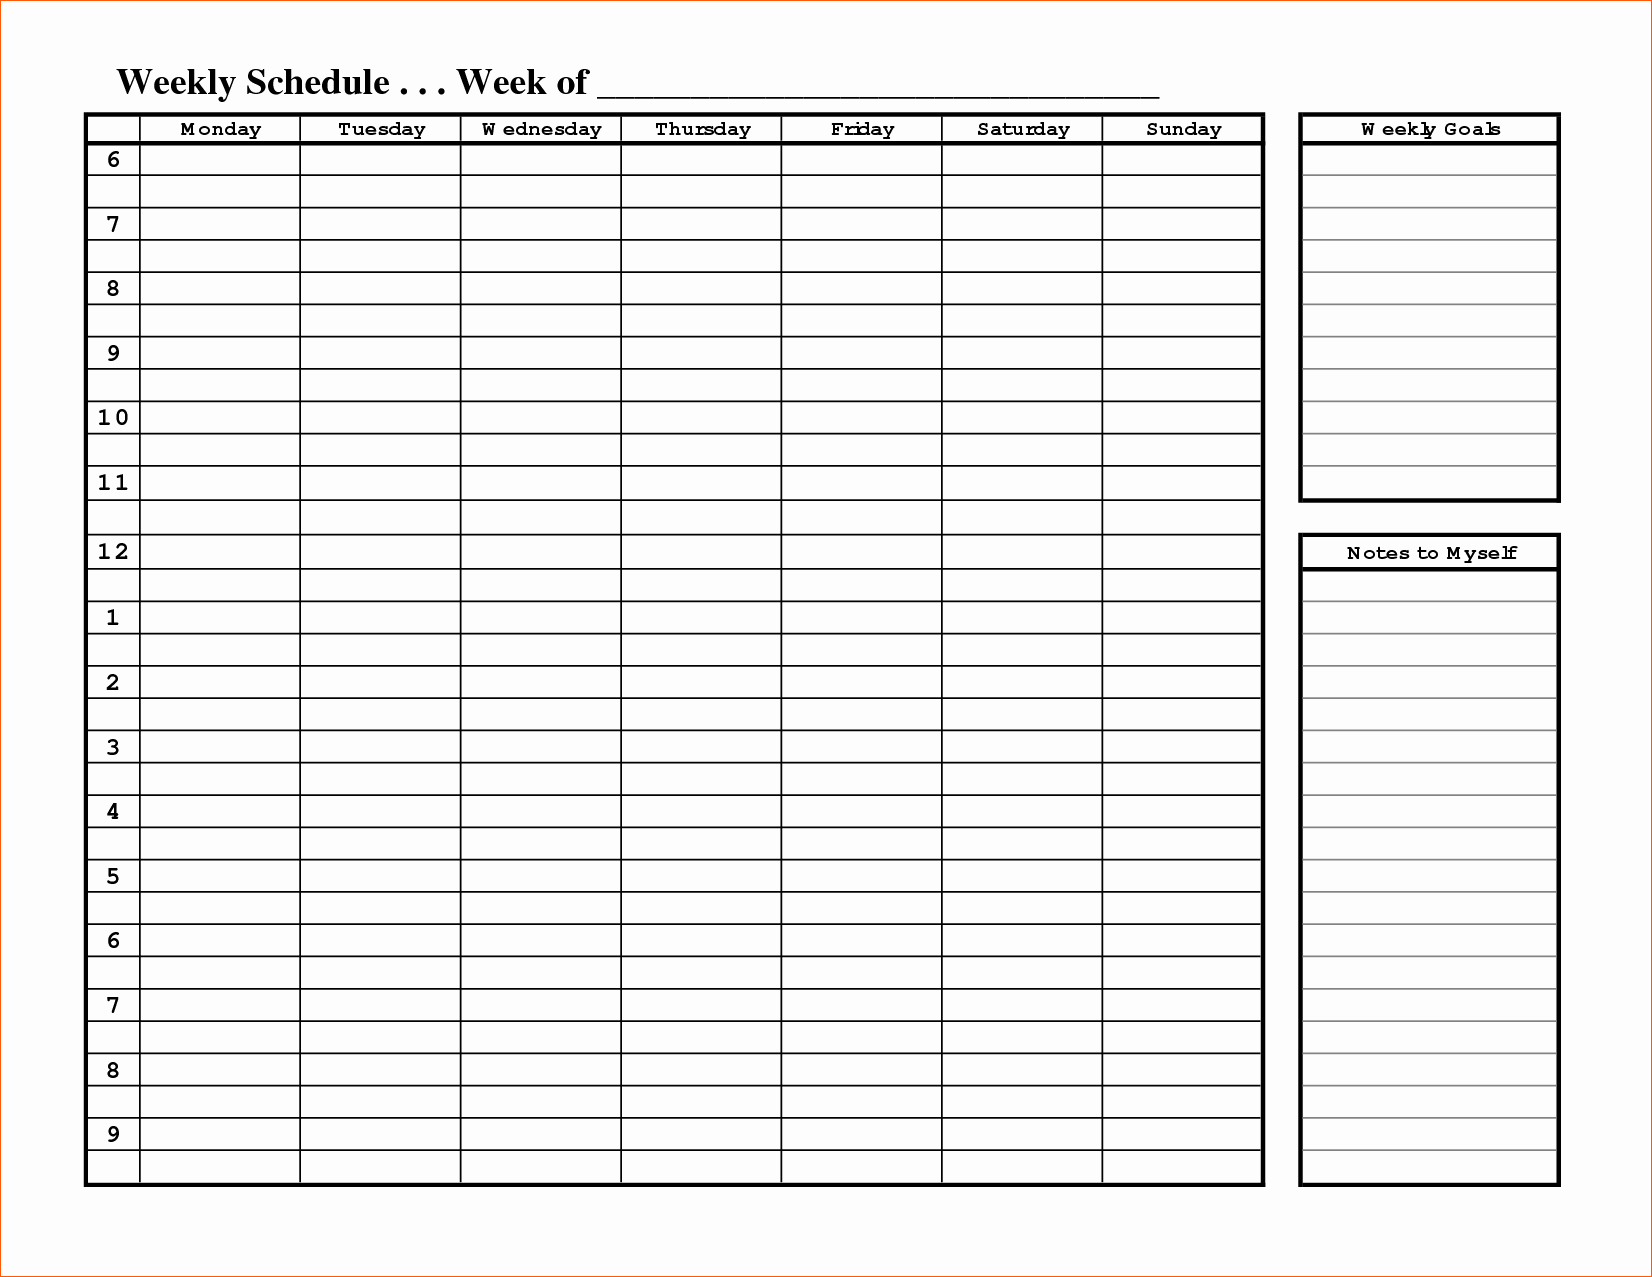 Weekly Schedule by Hour Template Lovely 10 Free Weekly Schedule Template